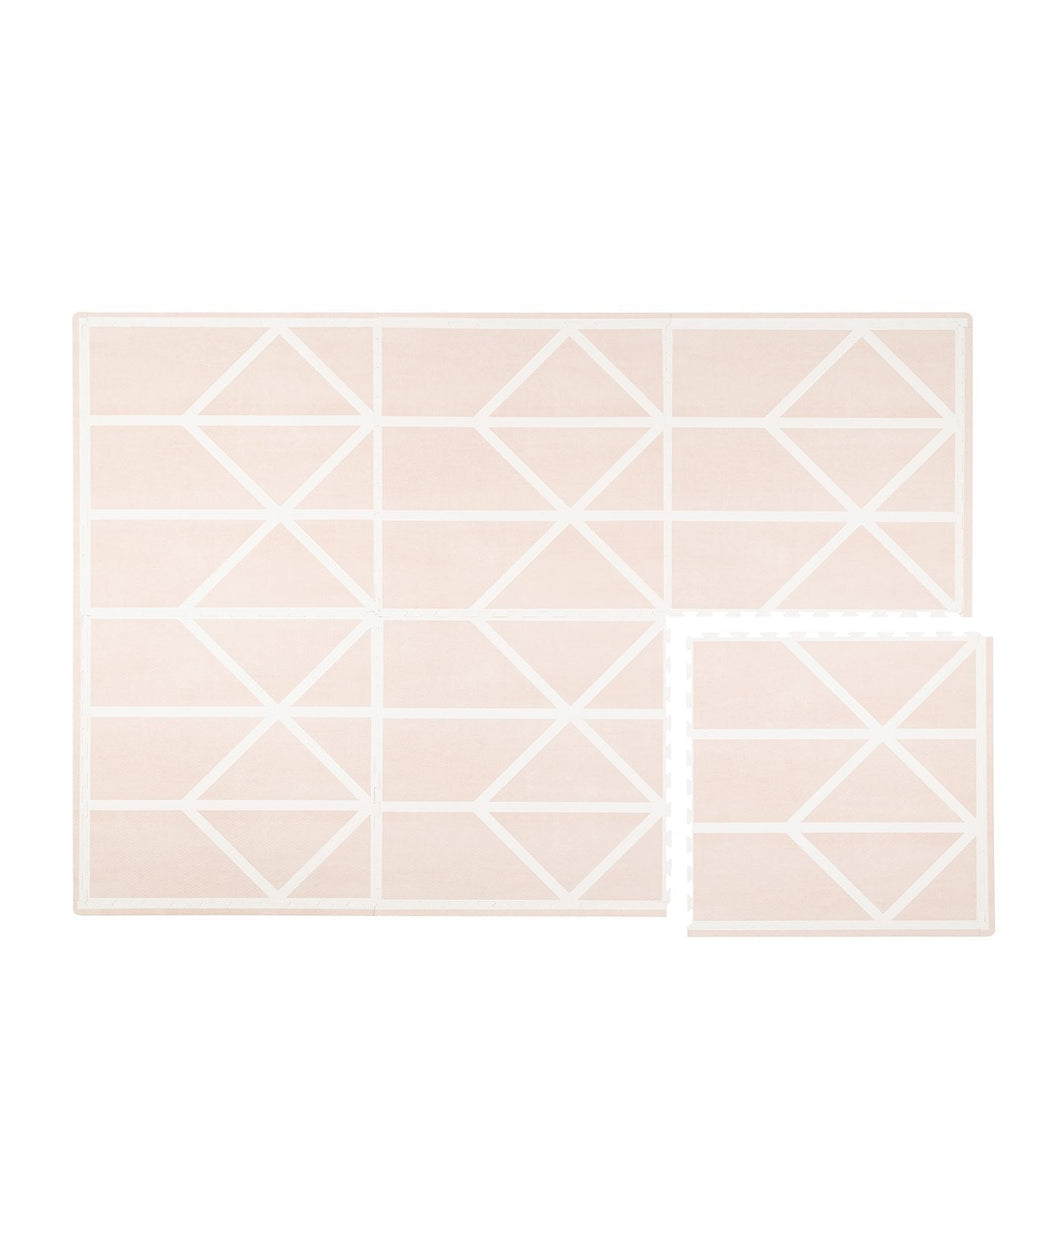 Toddlekind Play Mats Nordic / Vintage Nude / Standard Copy of Toddlekind Prettier Puzzle Playmats Nordic